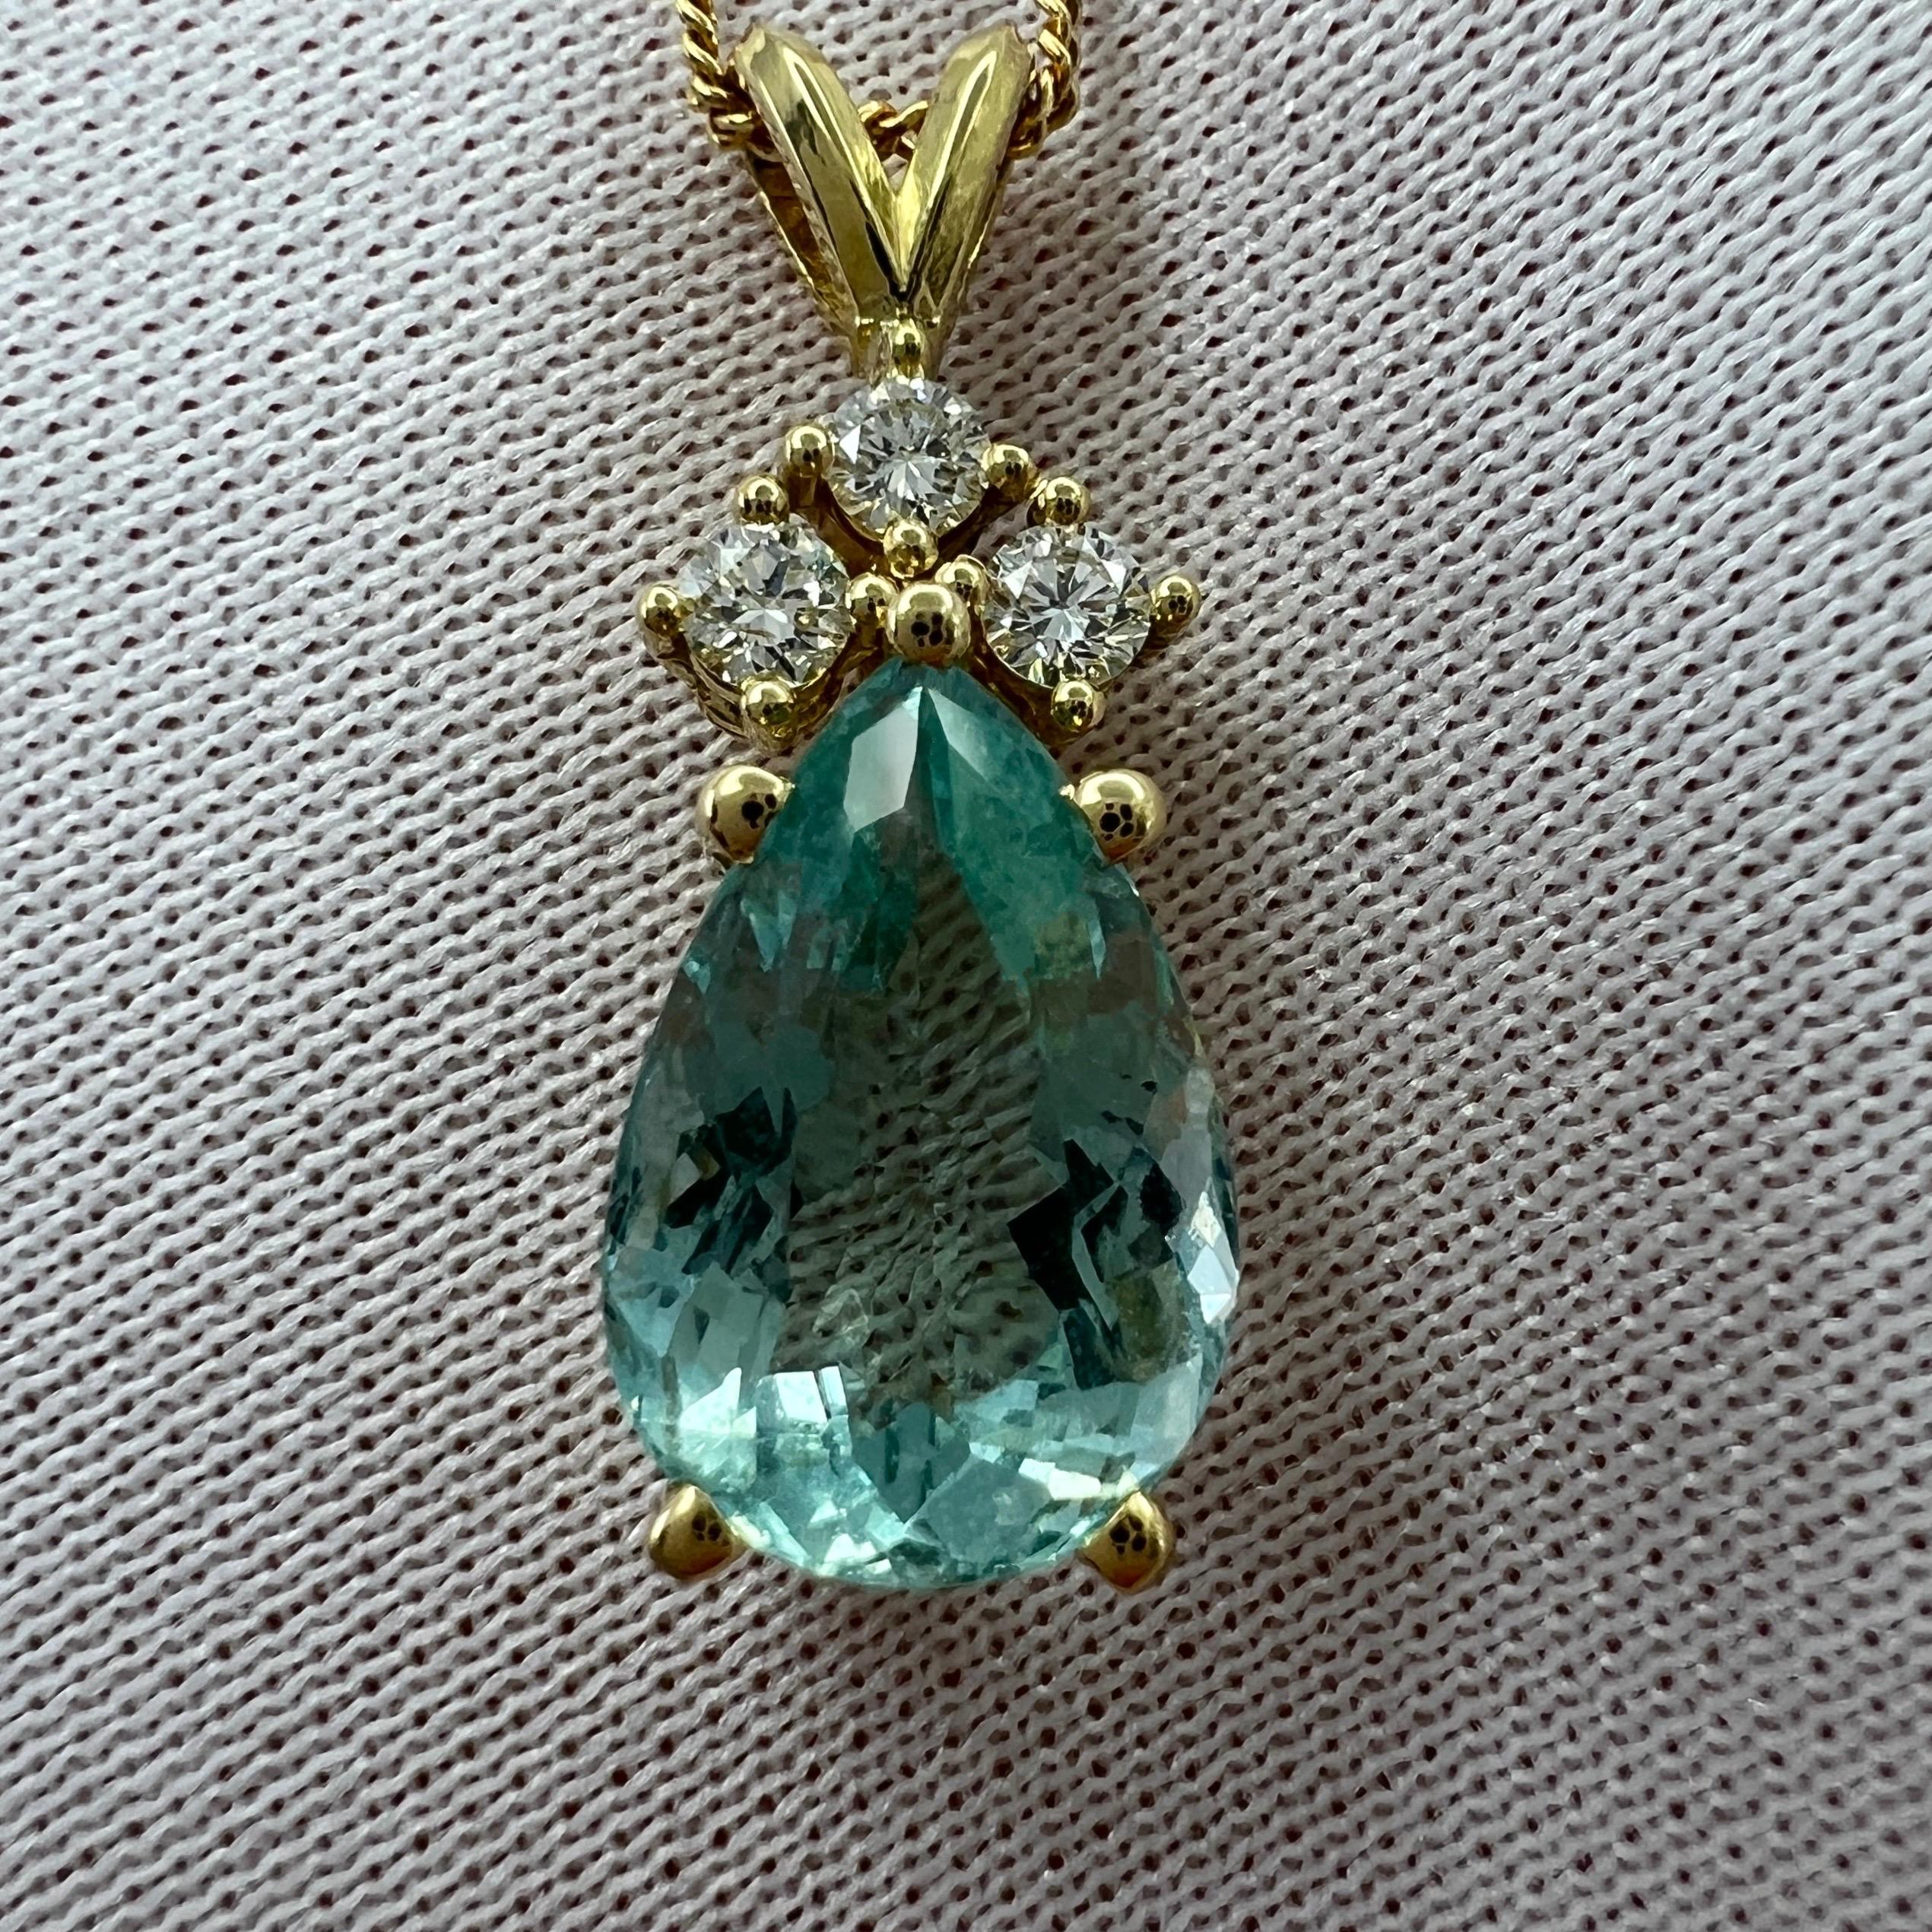 Natural 'Lagoon' Green Blue Aquamarine And Diamond 18k Yellow Gold Pendant Necklace.

3.30 Carat aquamarine with a stunning vivid 'lagoon' green blue colour and an excellent pear teardrop cut showing lots of brightness and light return. Also has